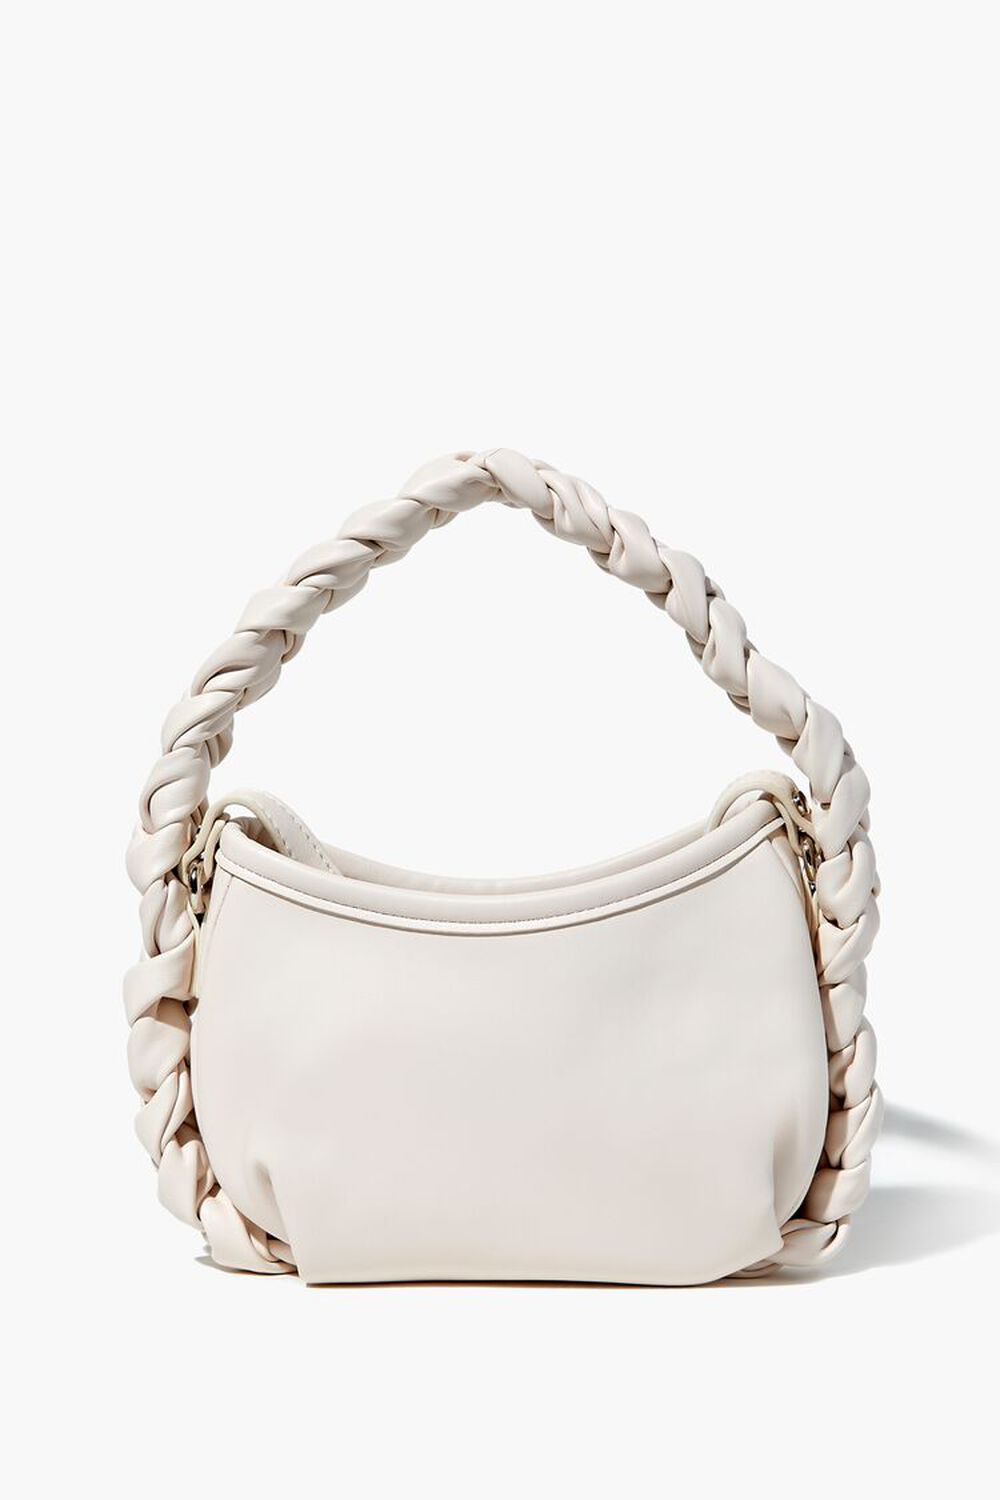 White Purse Crossbody Bag With Braided Strap Cute Ivory 